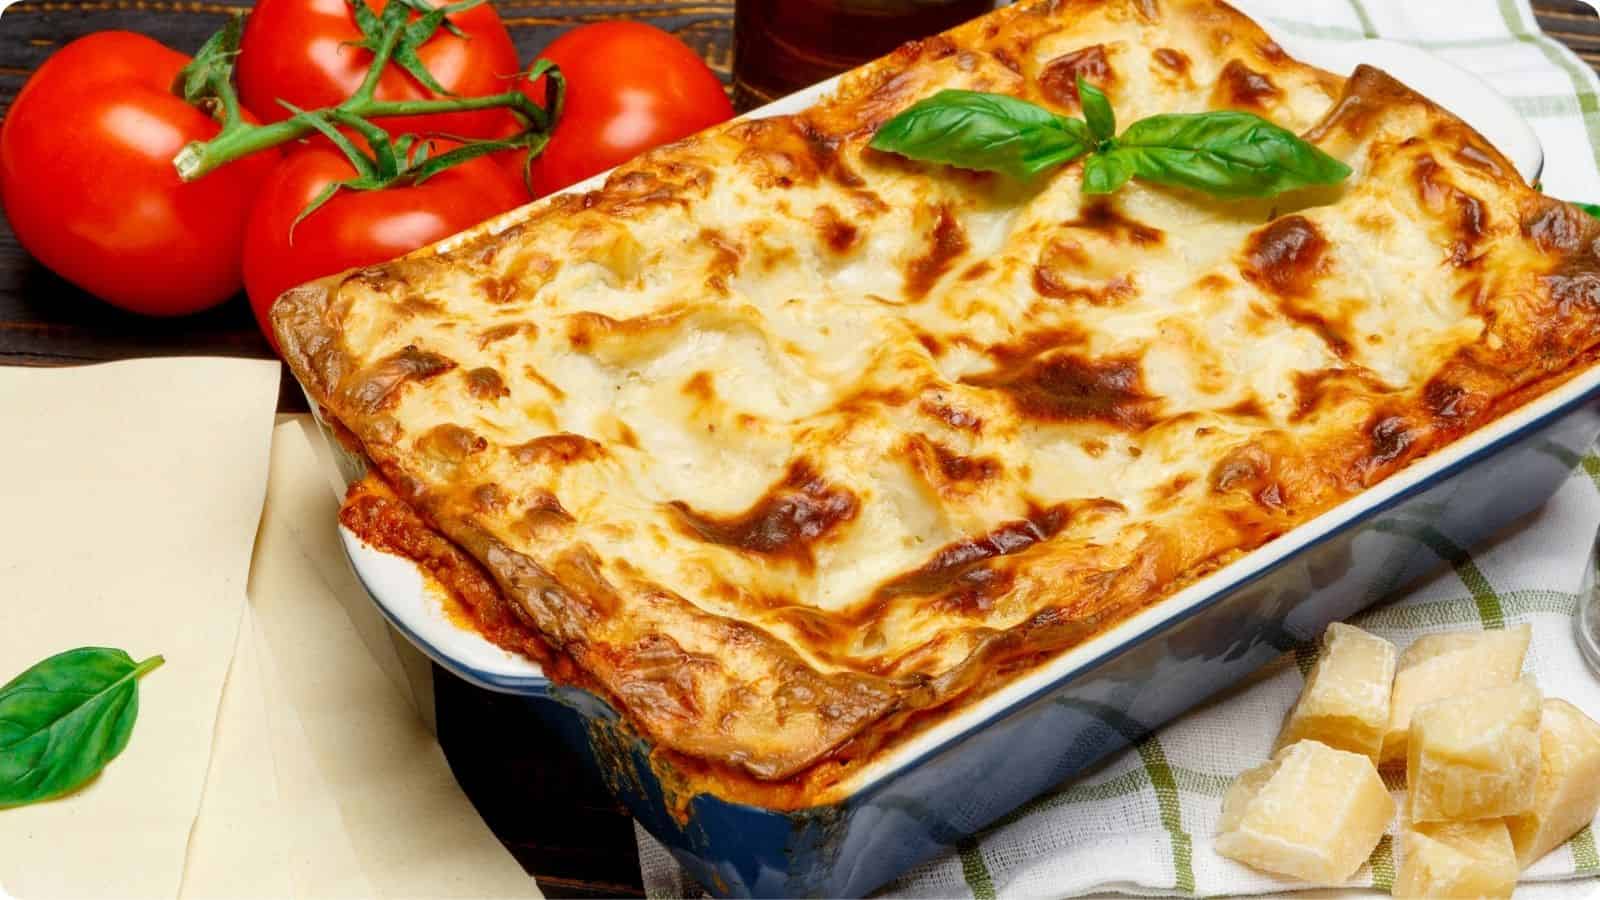 Freshly baked lasagna in a baking dish on a wooden table served with tomatoes and parmesan on the side on top of a wooden table.⁣
⁣⁣⁣⁣⁣⁣⁣⁣⁣⁣⁣⁣⁣
